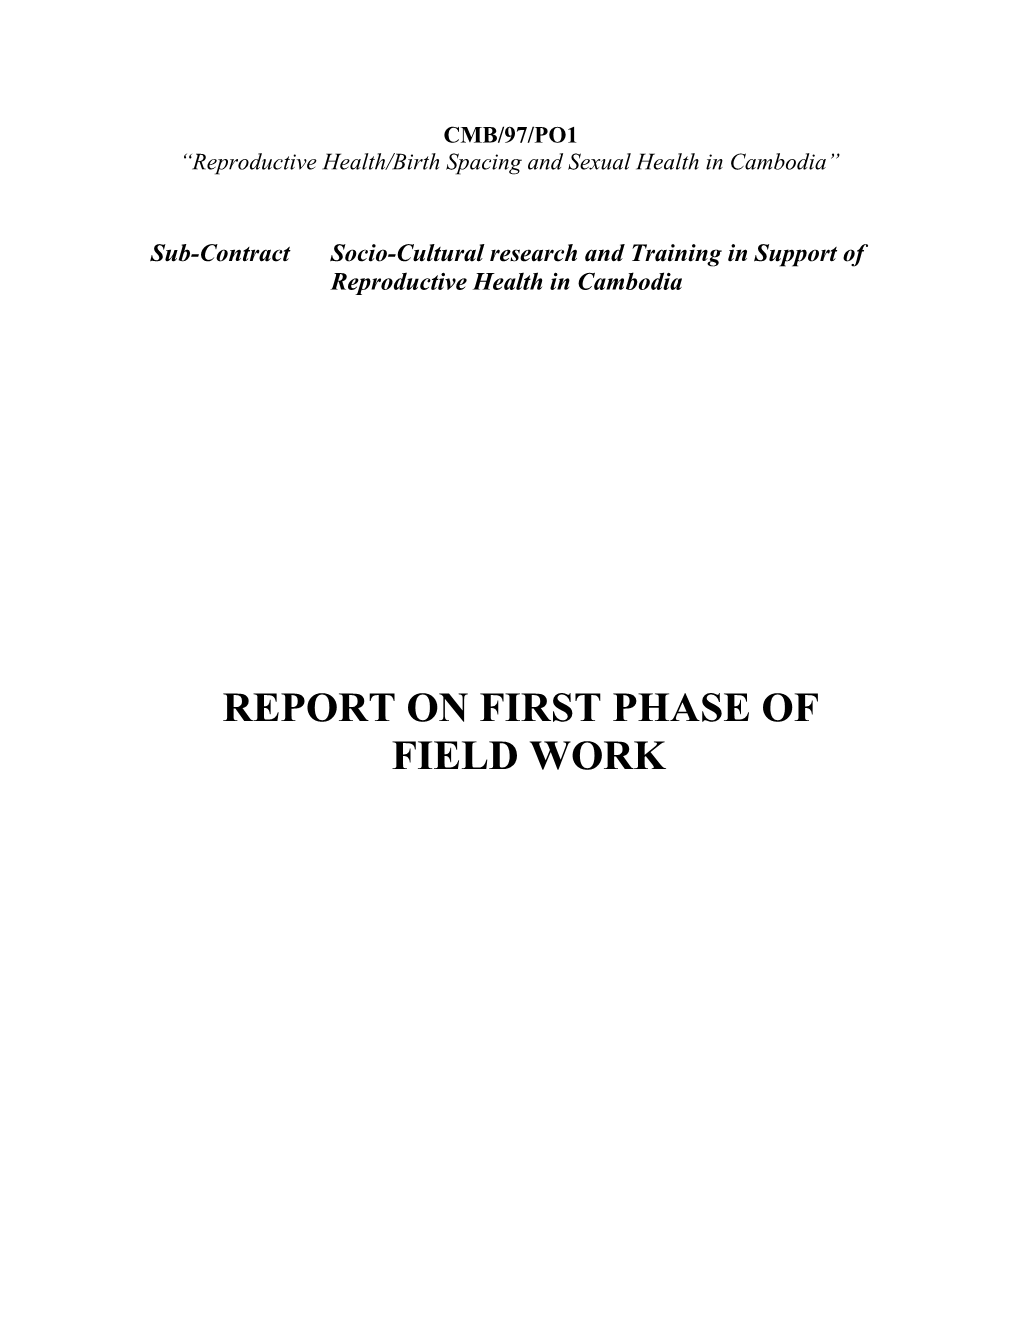 Social Science Research - Report on First Round of Field Work